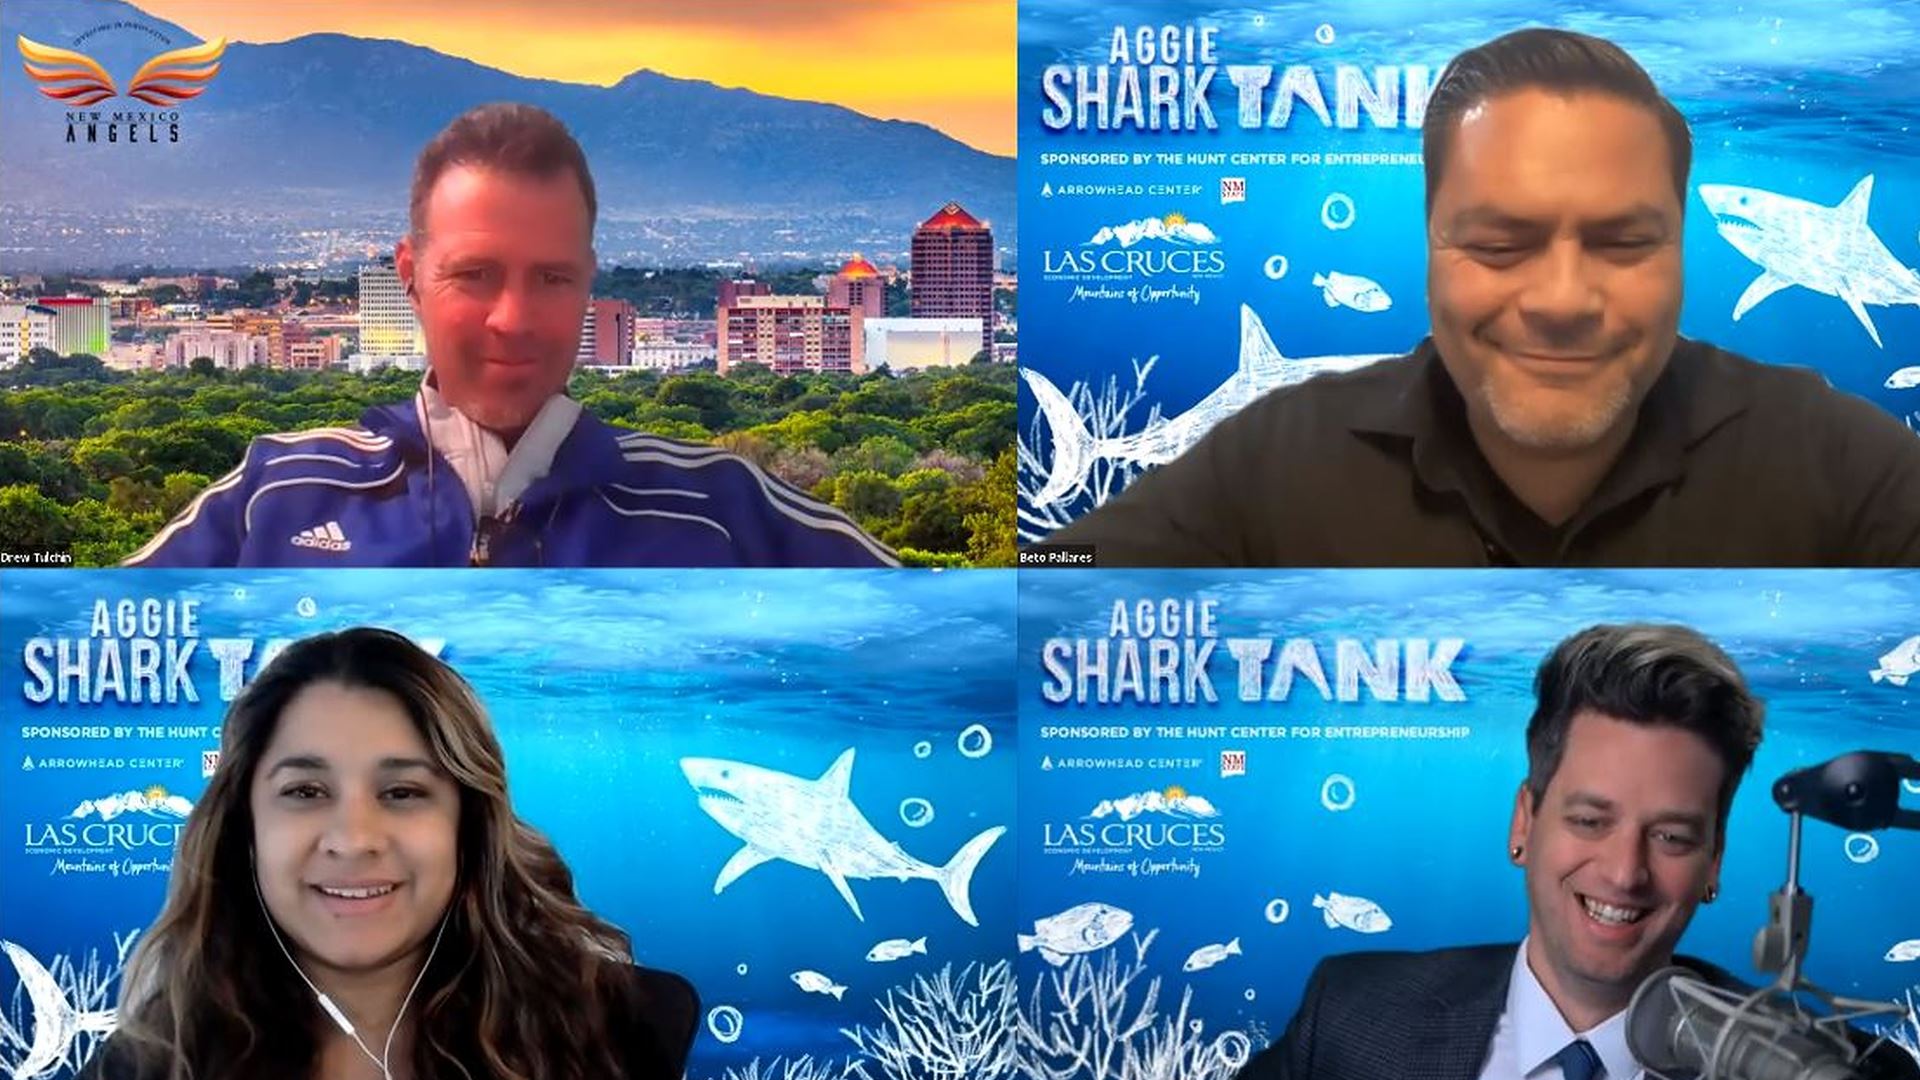 Aggie Shark Tank turns up the heat for businesses, investors